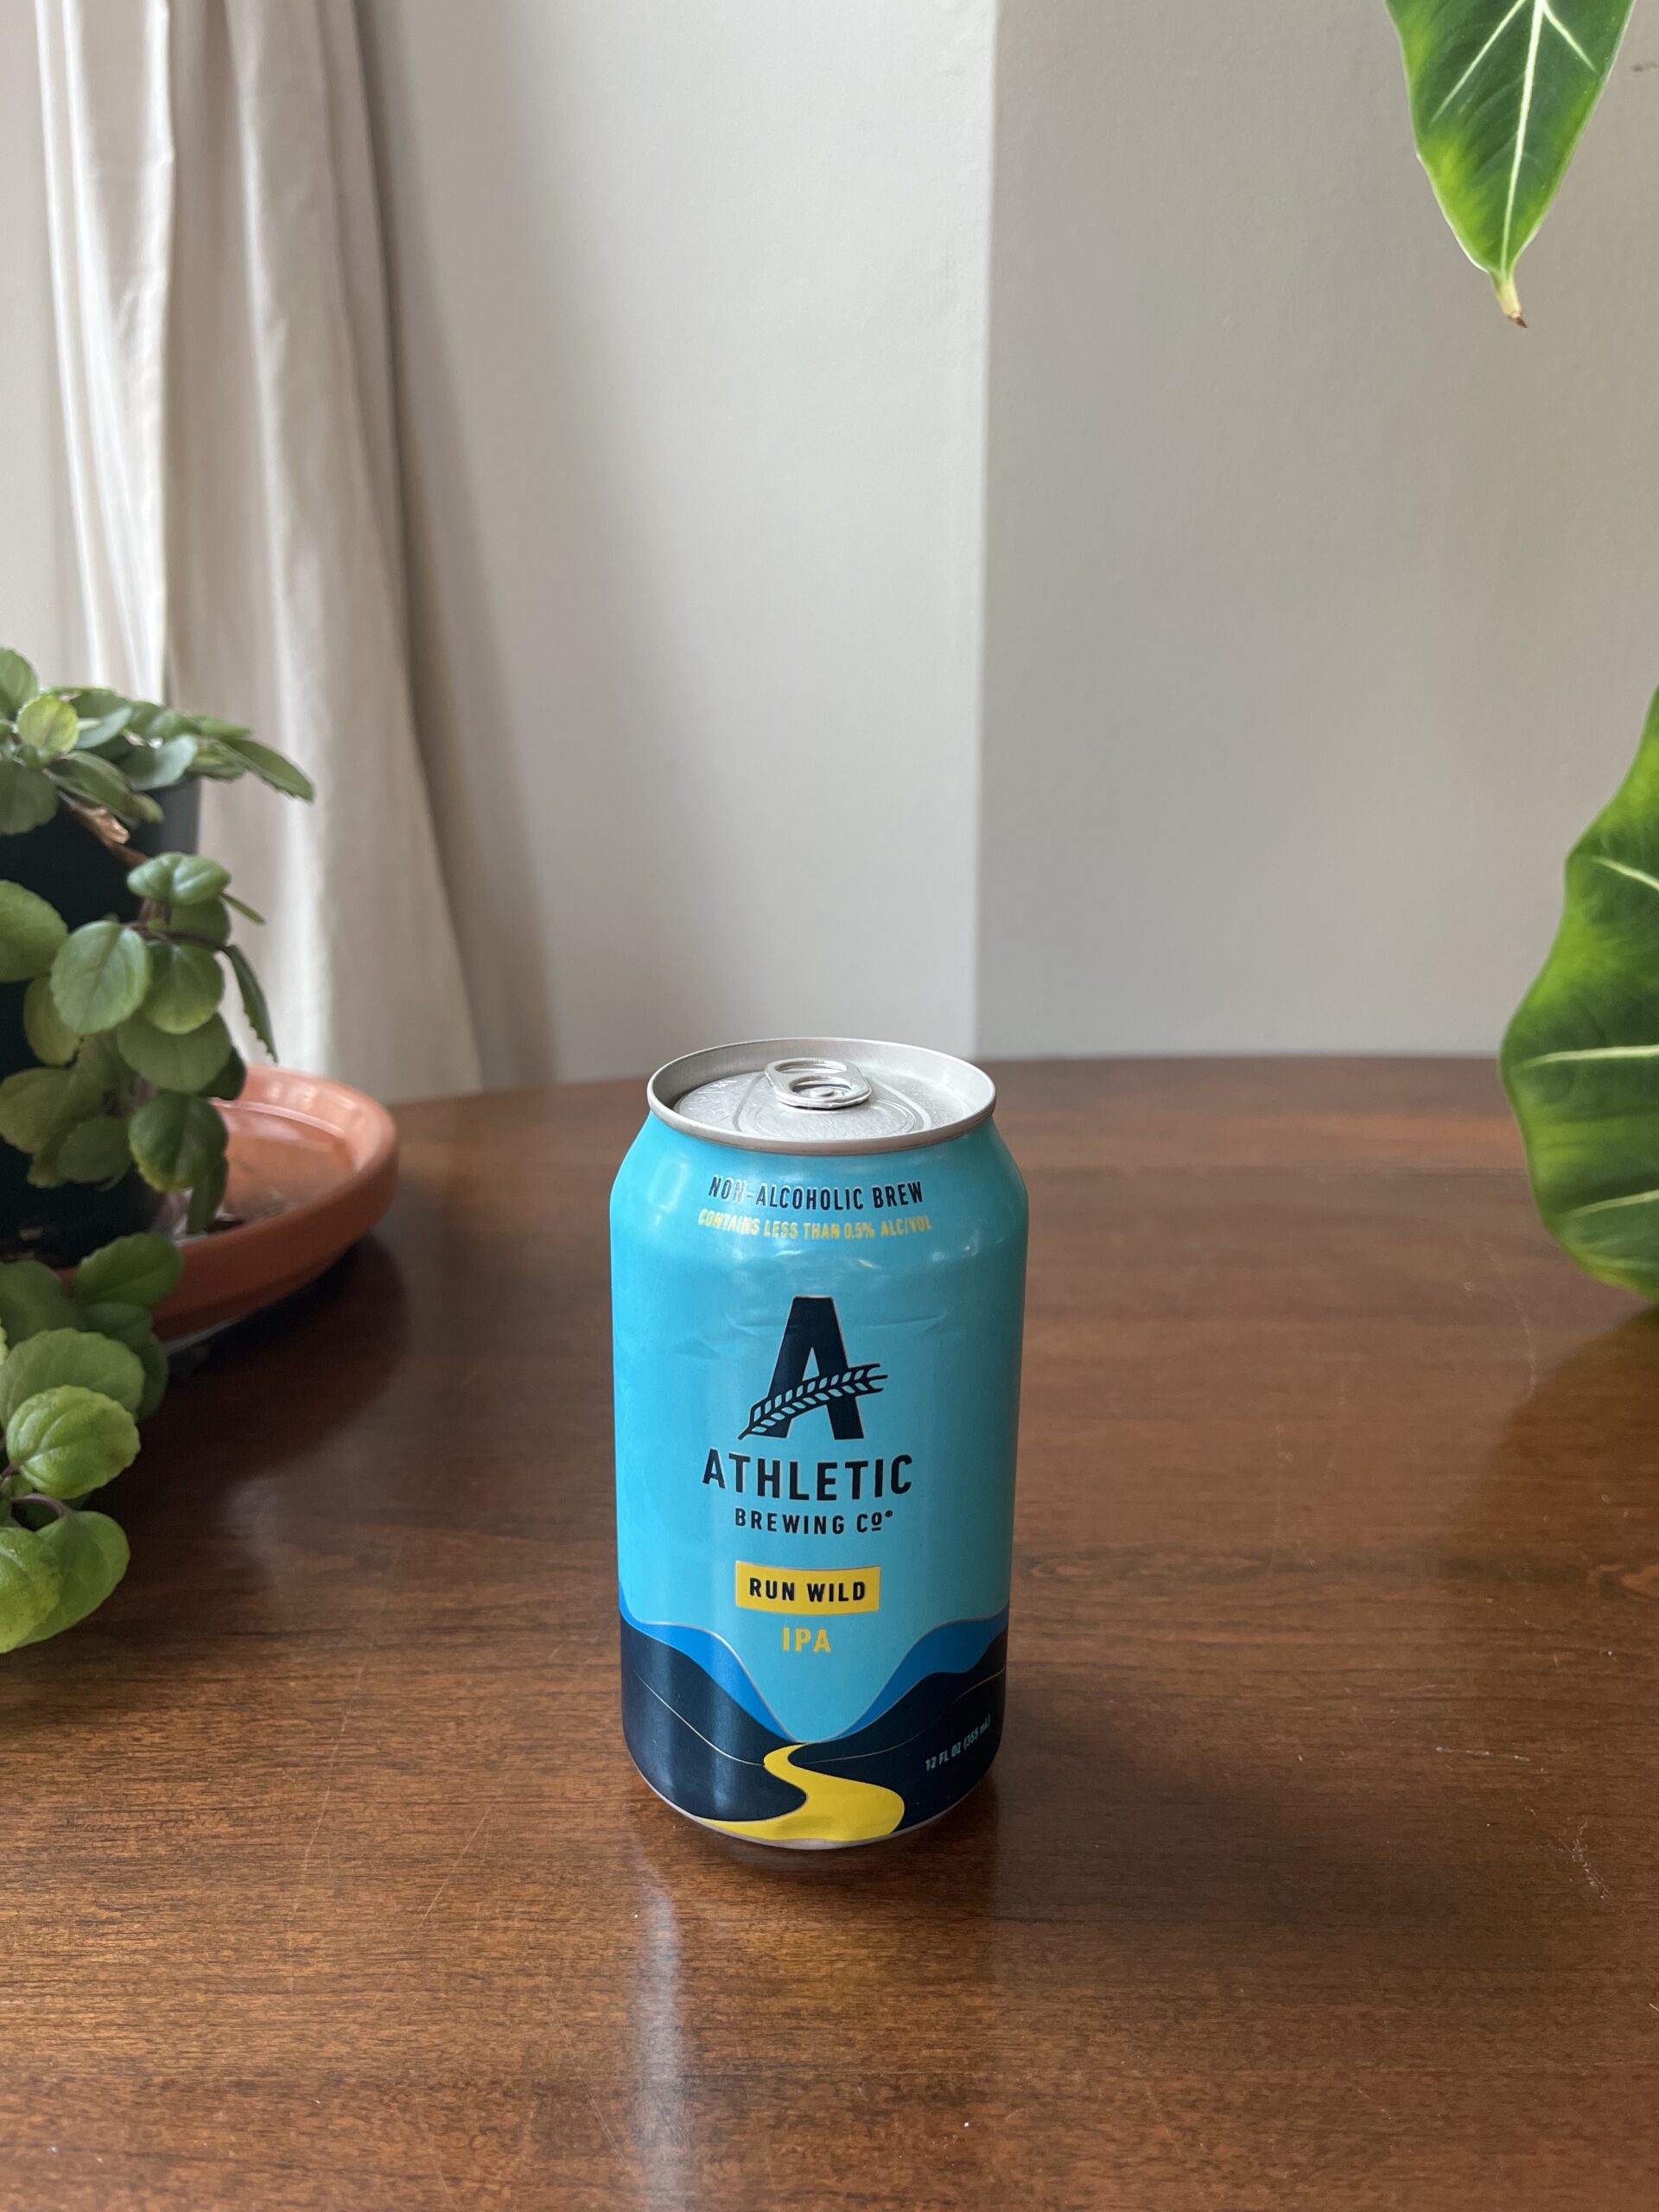 A can of Athletic Brewing Co. Run Wild IPA non-alcoholic beer sits on a wooden table next to a plant.